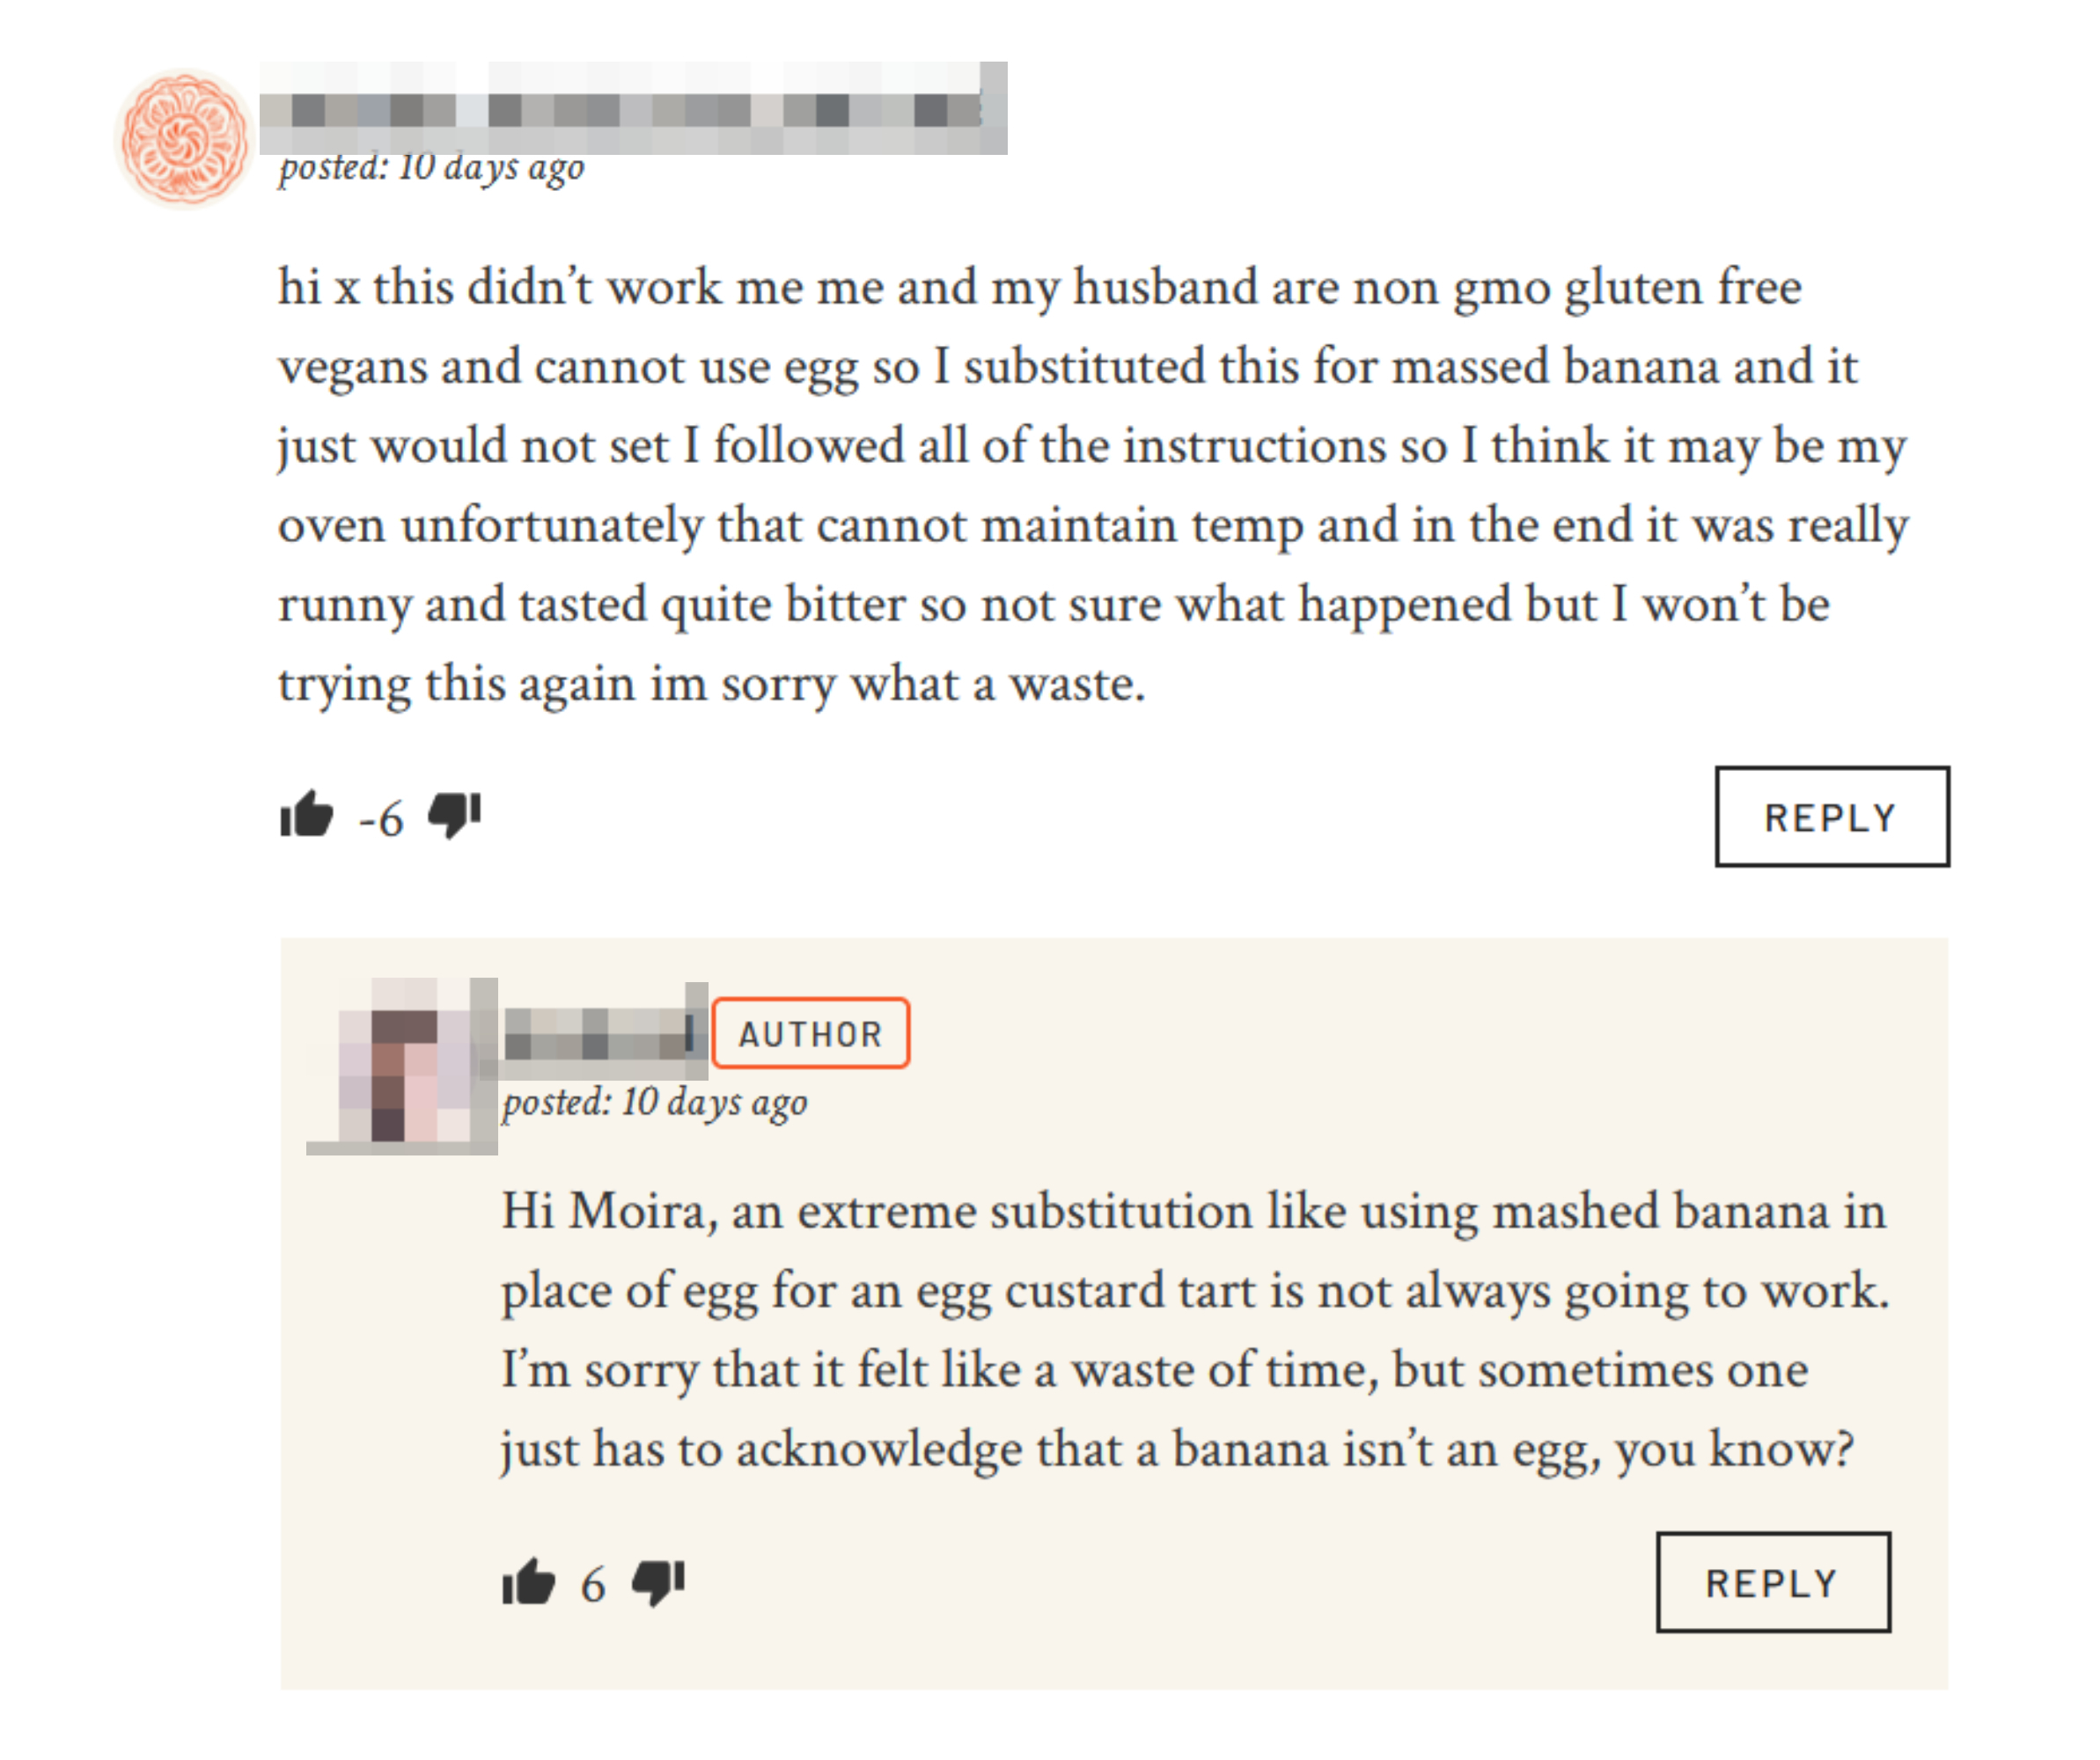 A review of an egg custard tart recipe from someone who is vegan, gluten-free, and non-GMO, so they replaced eggs with banana and are surprised it didn&#x27;t come out well because it wouldn&#x27;t &quot;set&quot;